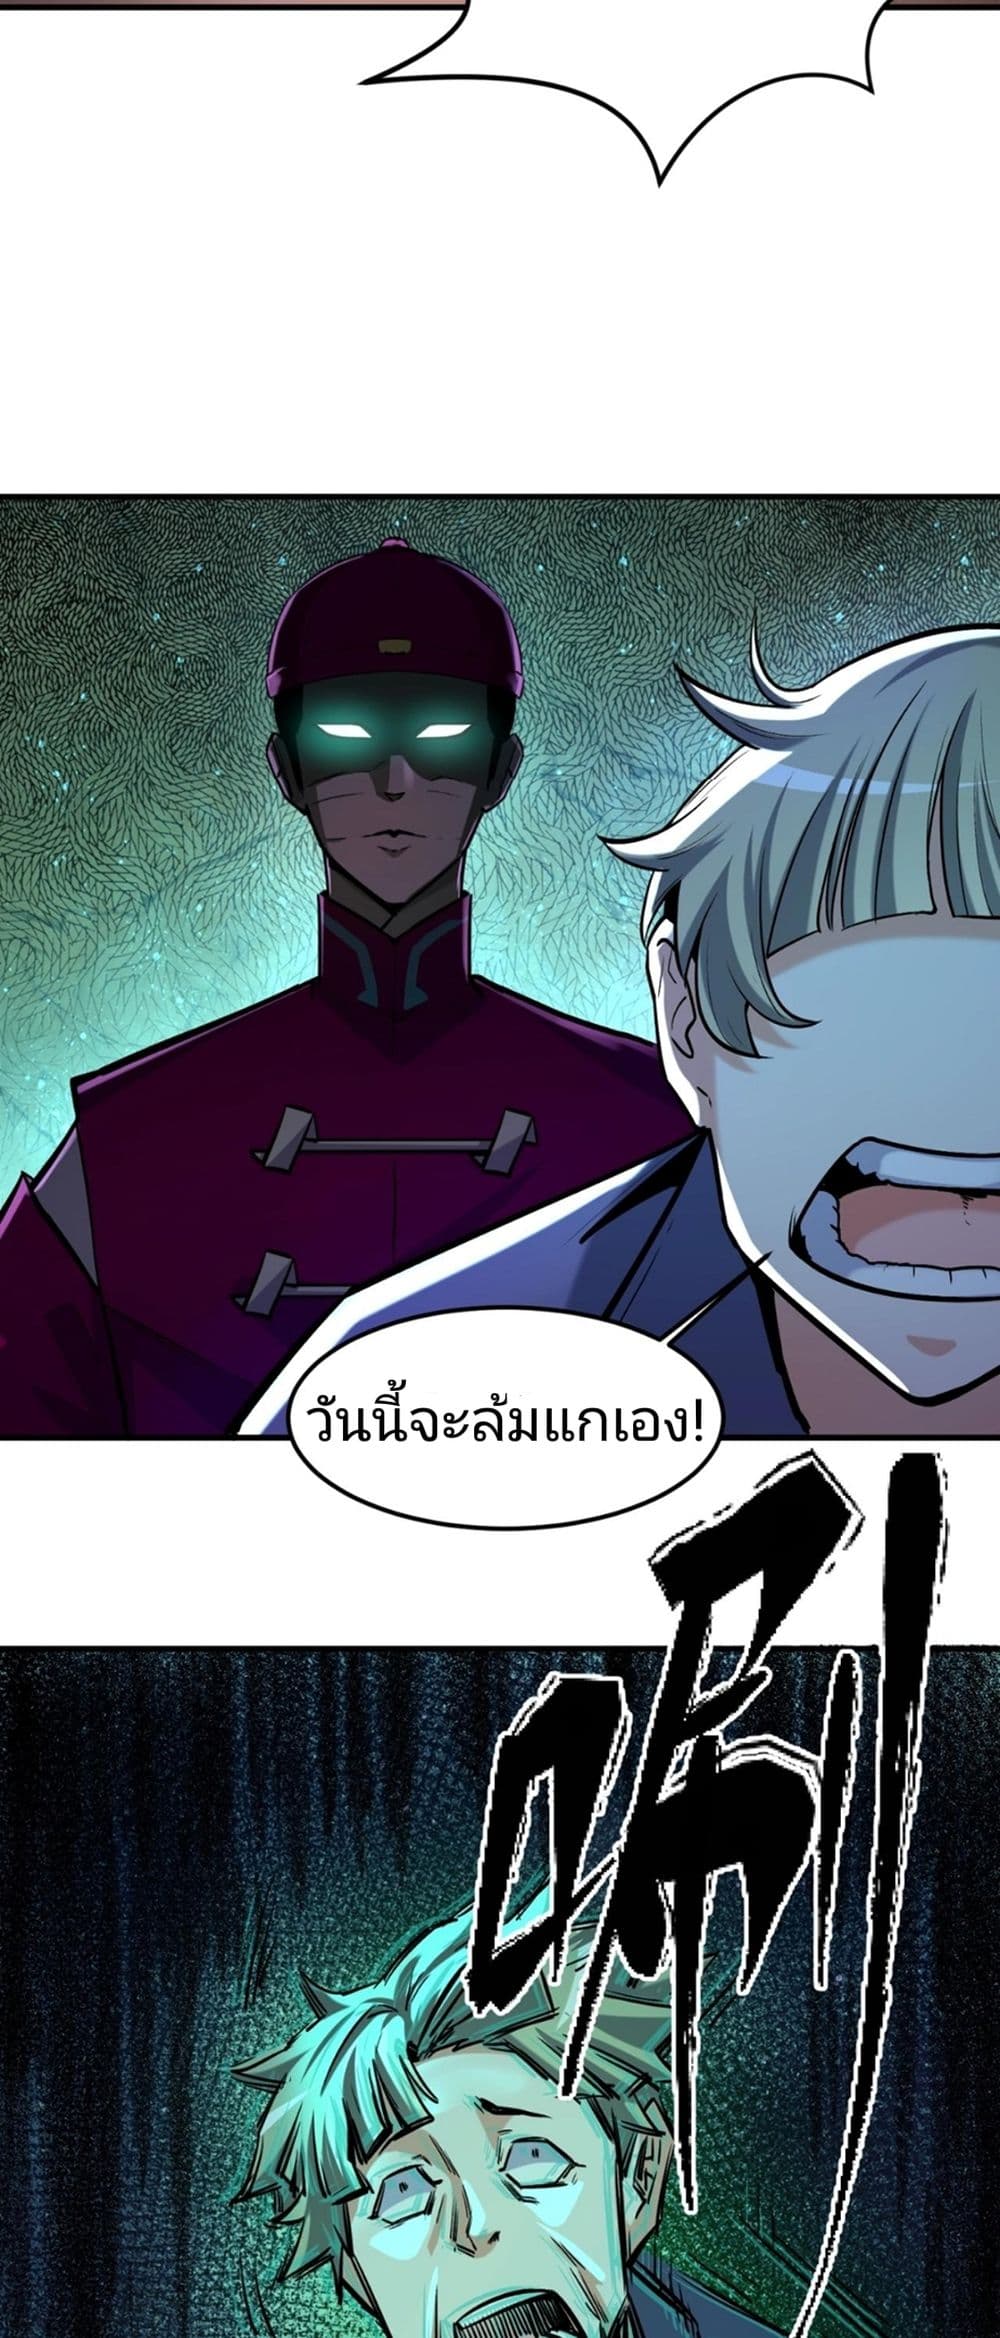 The Age of Ghost Spirits à¸à¸­à¸à¸à¸µà¹ 1 (33)